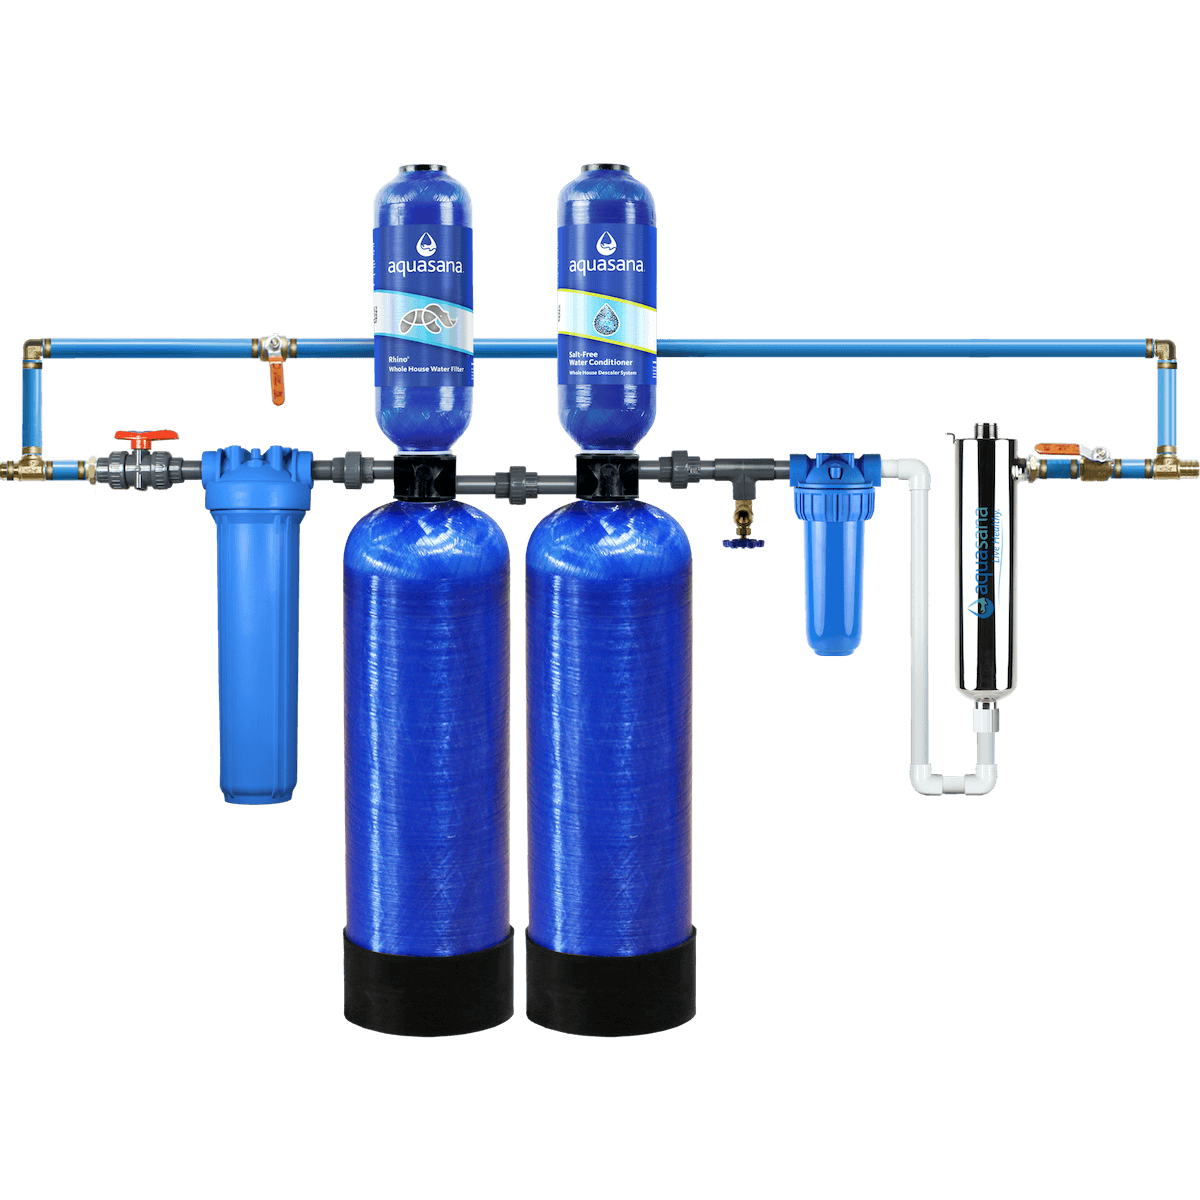 Rhino® Chloramines Whole House Water UV Filter System Home Water Filtration Removes 99% of Bacteria & Viruses Aquasana